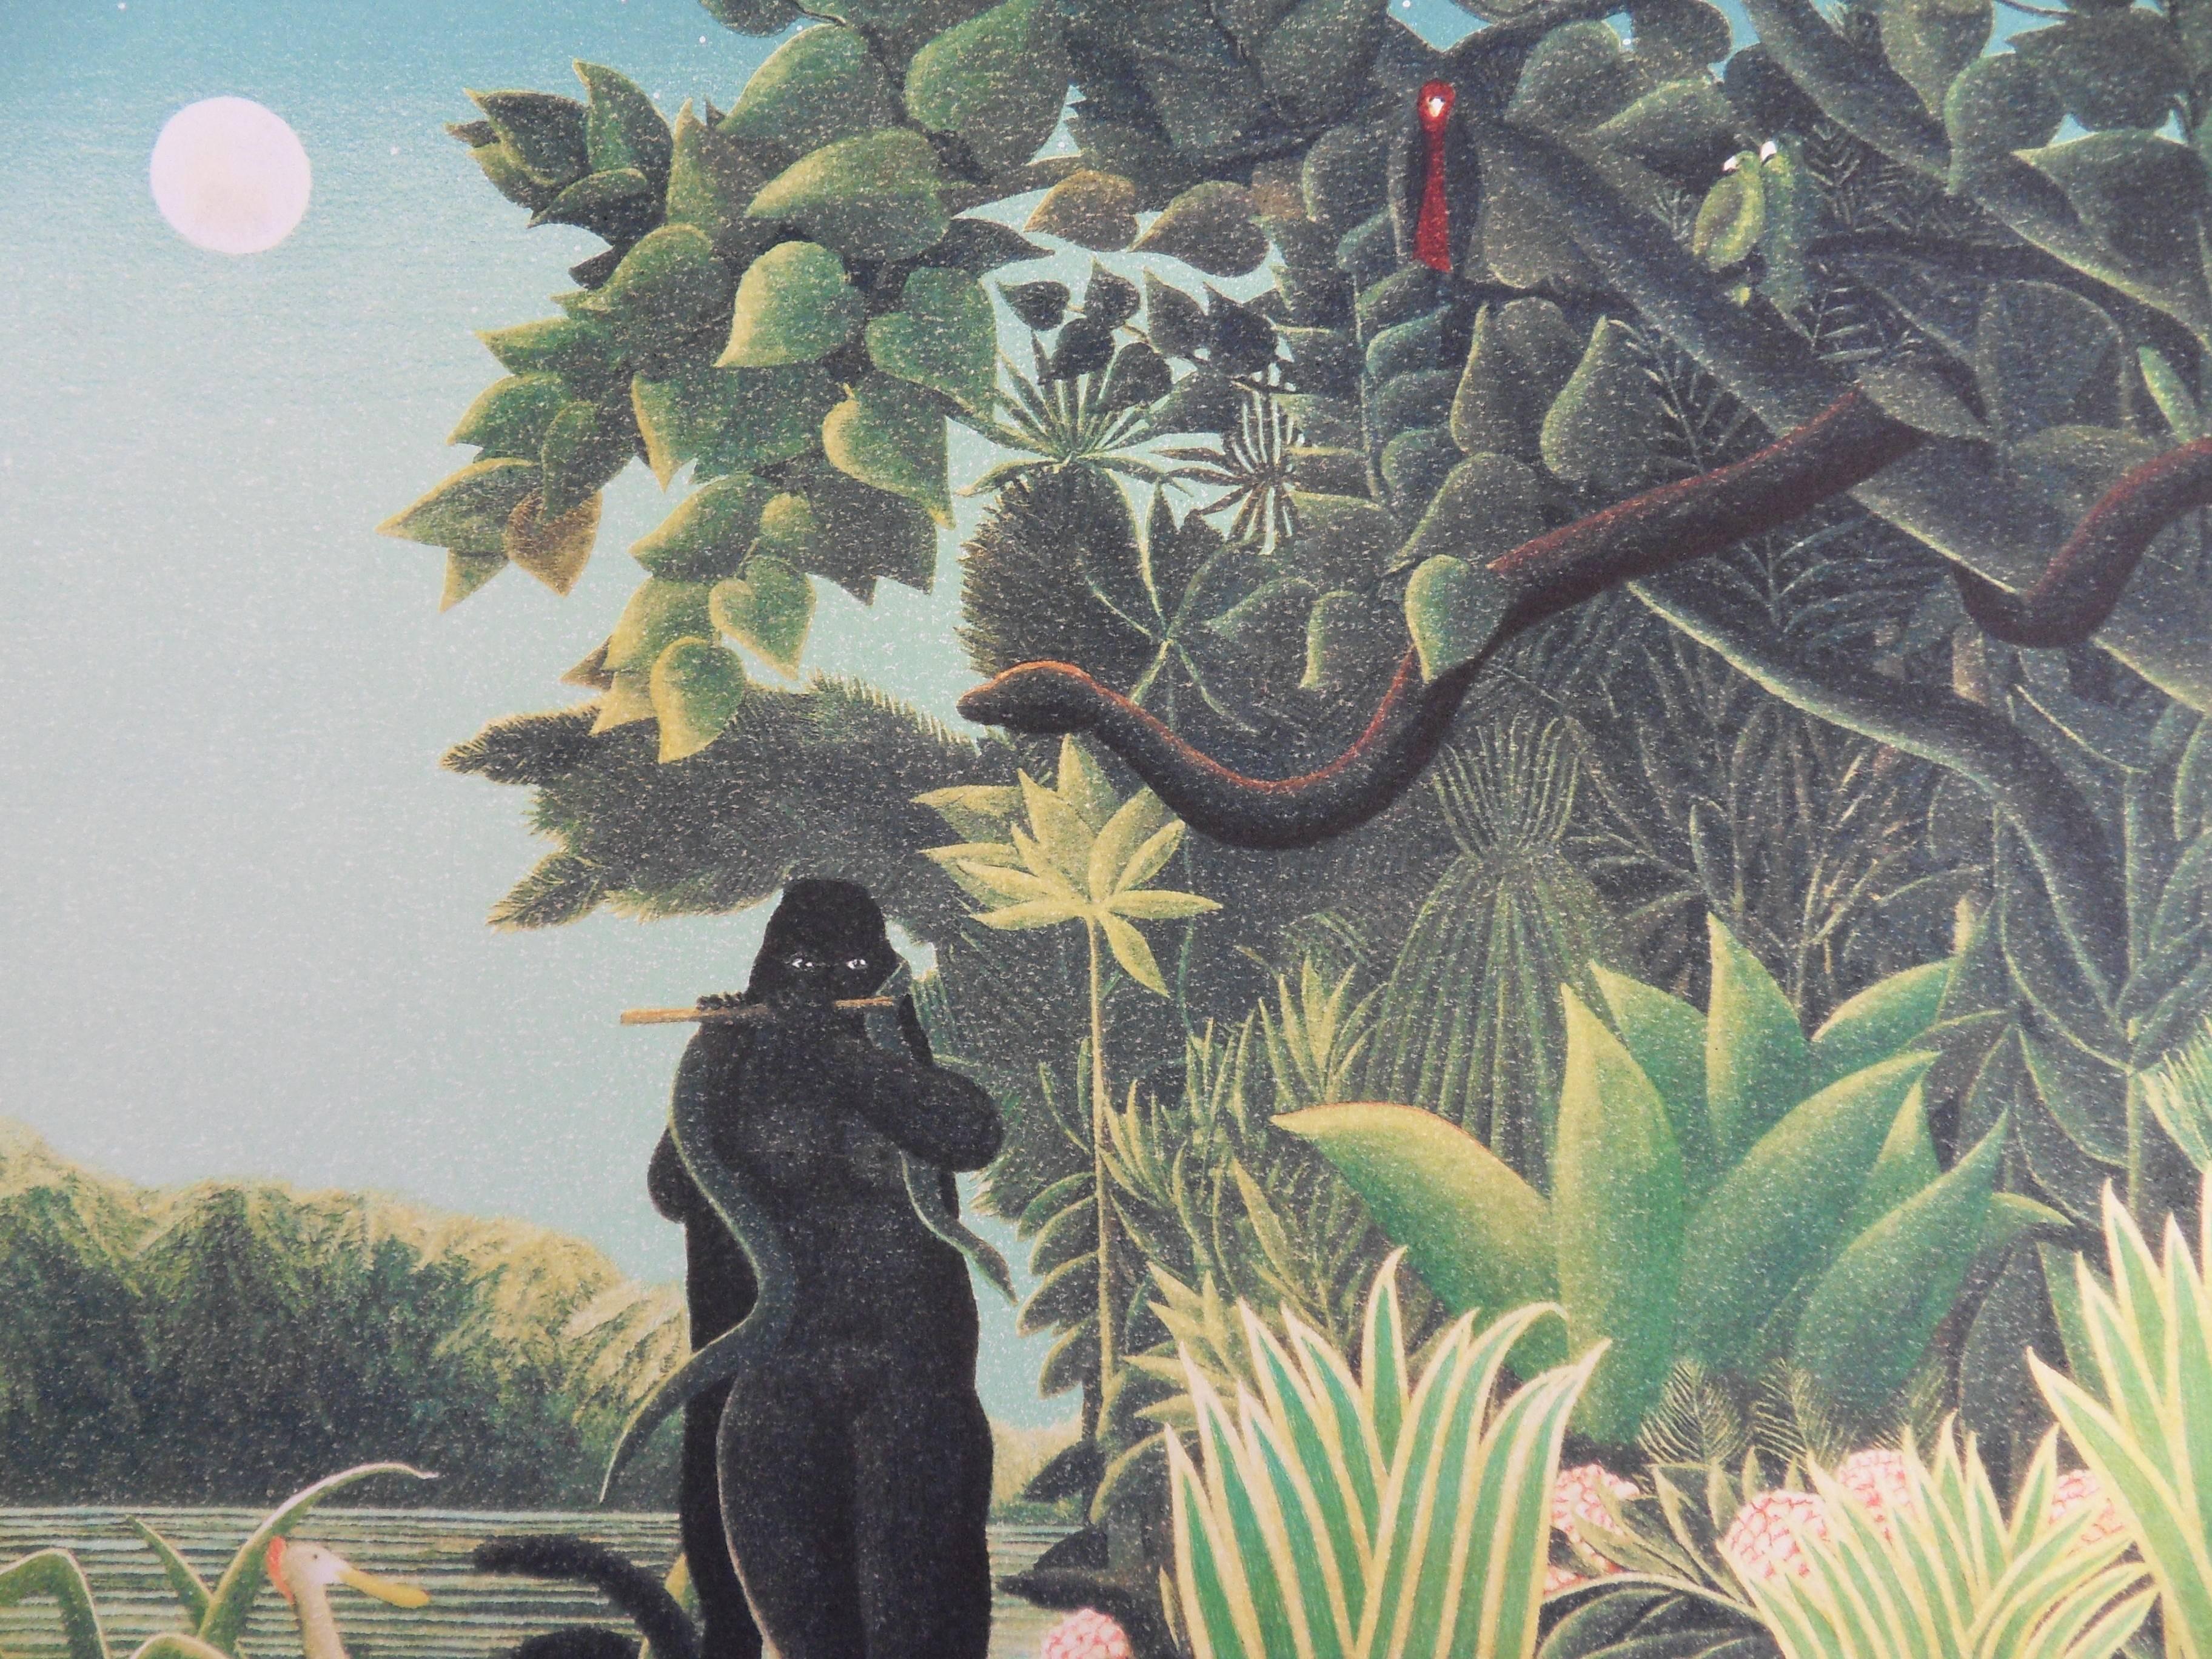 Henri ROUSSEAU (called Le Douanier ROUSSEAU) (after)
The Snake Charmer

Stone lithograph after a painting
Printed signature in the plate
Numbered /300 copies
On vellum 57 x 75 cm (c. 23 x 30i n)

Information : This lithograph was created after the